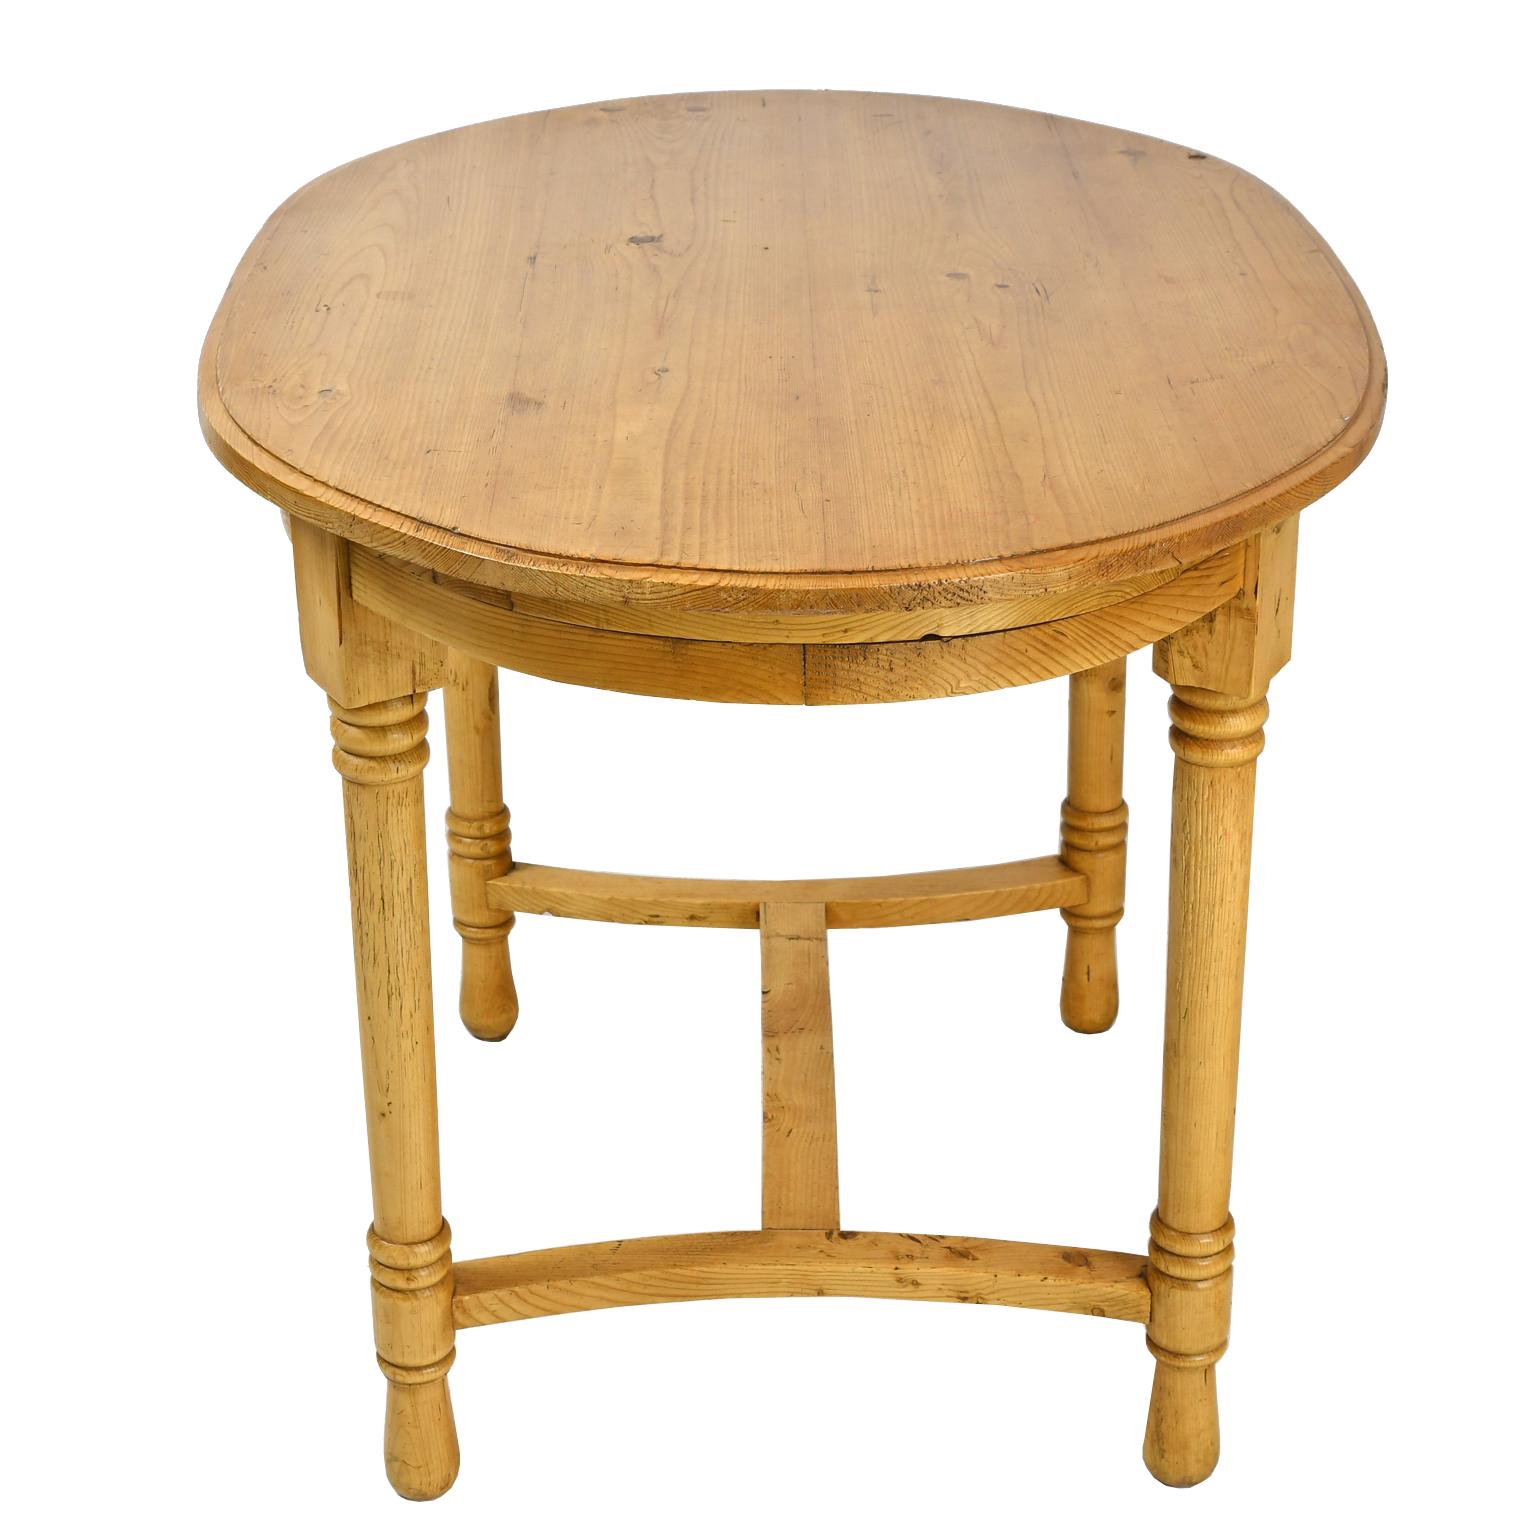 Country Antique European Oval Table in Pine, Danish or German, circa 1900